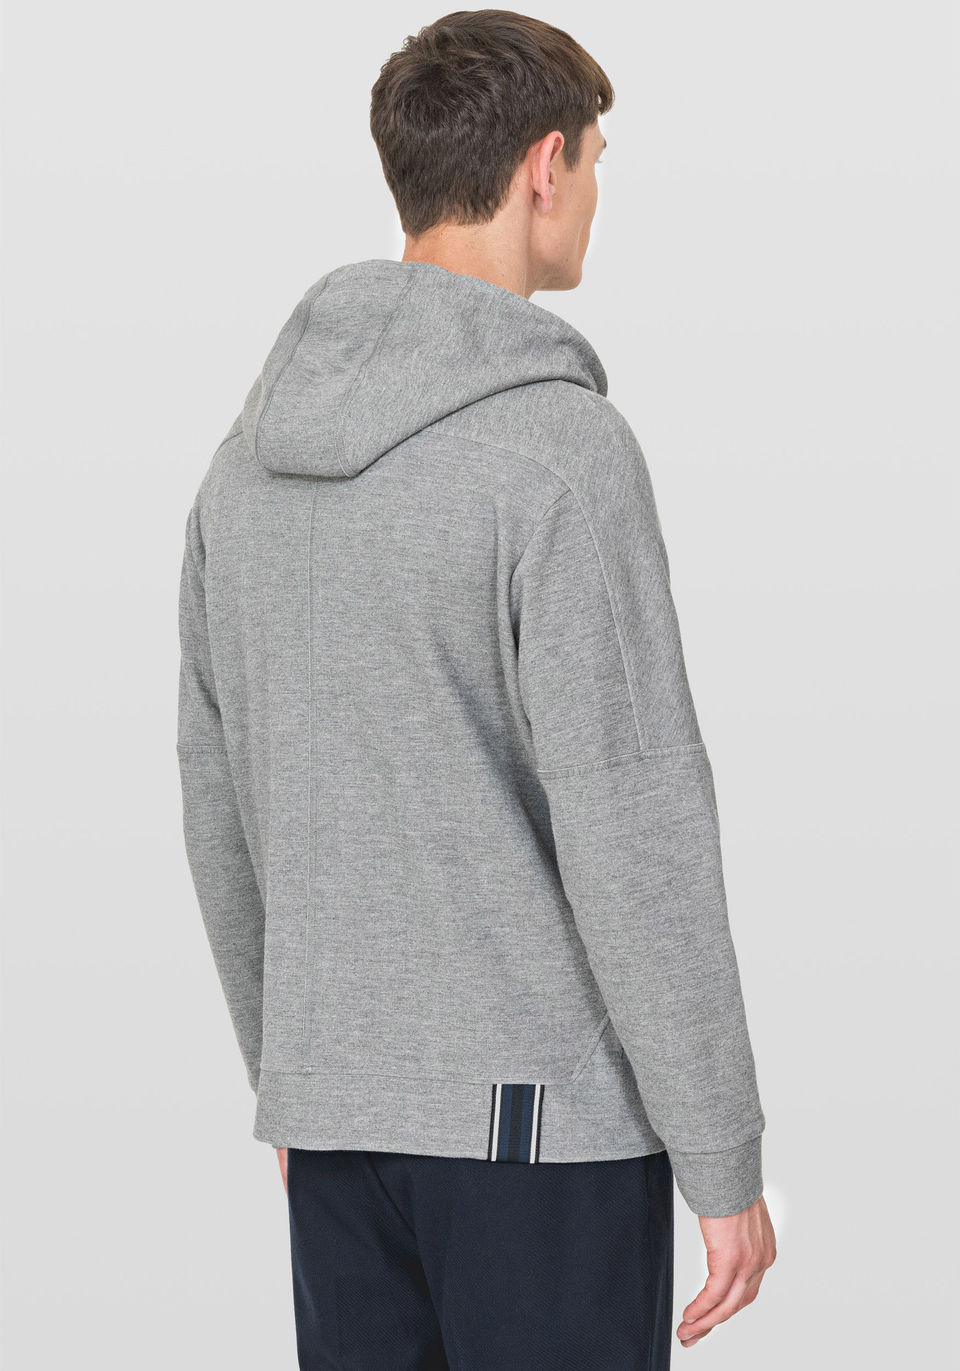 COTTON-BLEND SWEATSHIRT IN AN OVERSIZED FIT WITH STRAIGHT HEM DETAIL - Antony Morato Online Shop